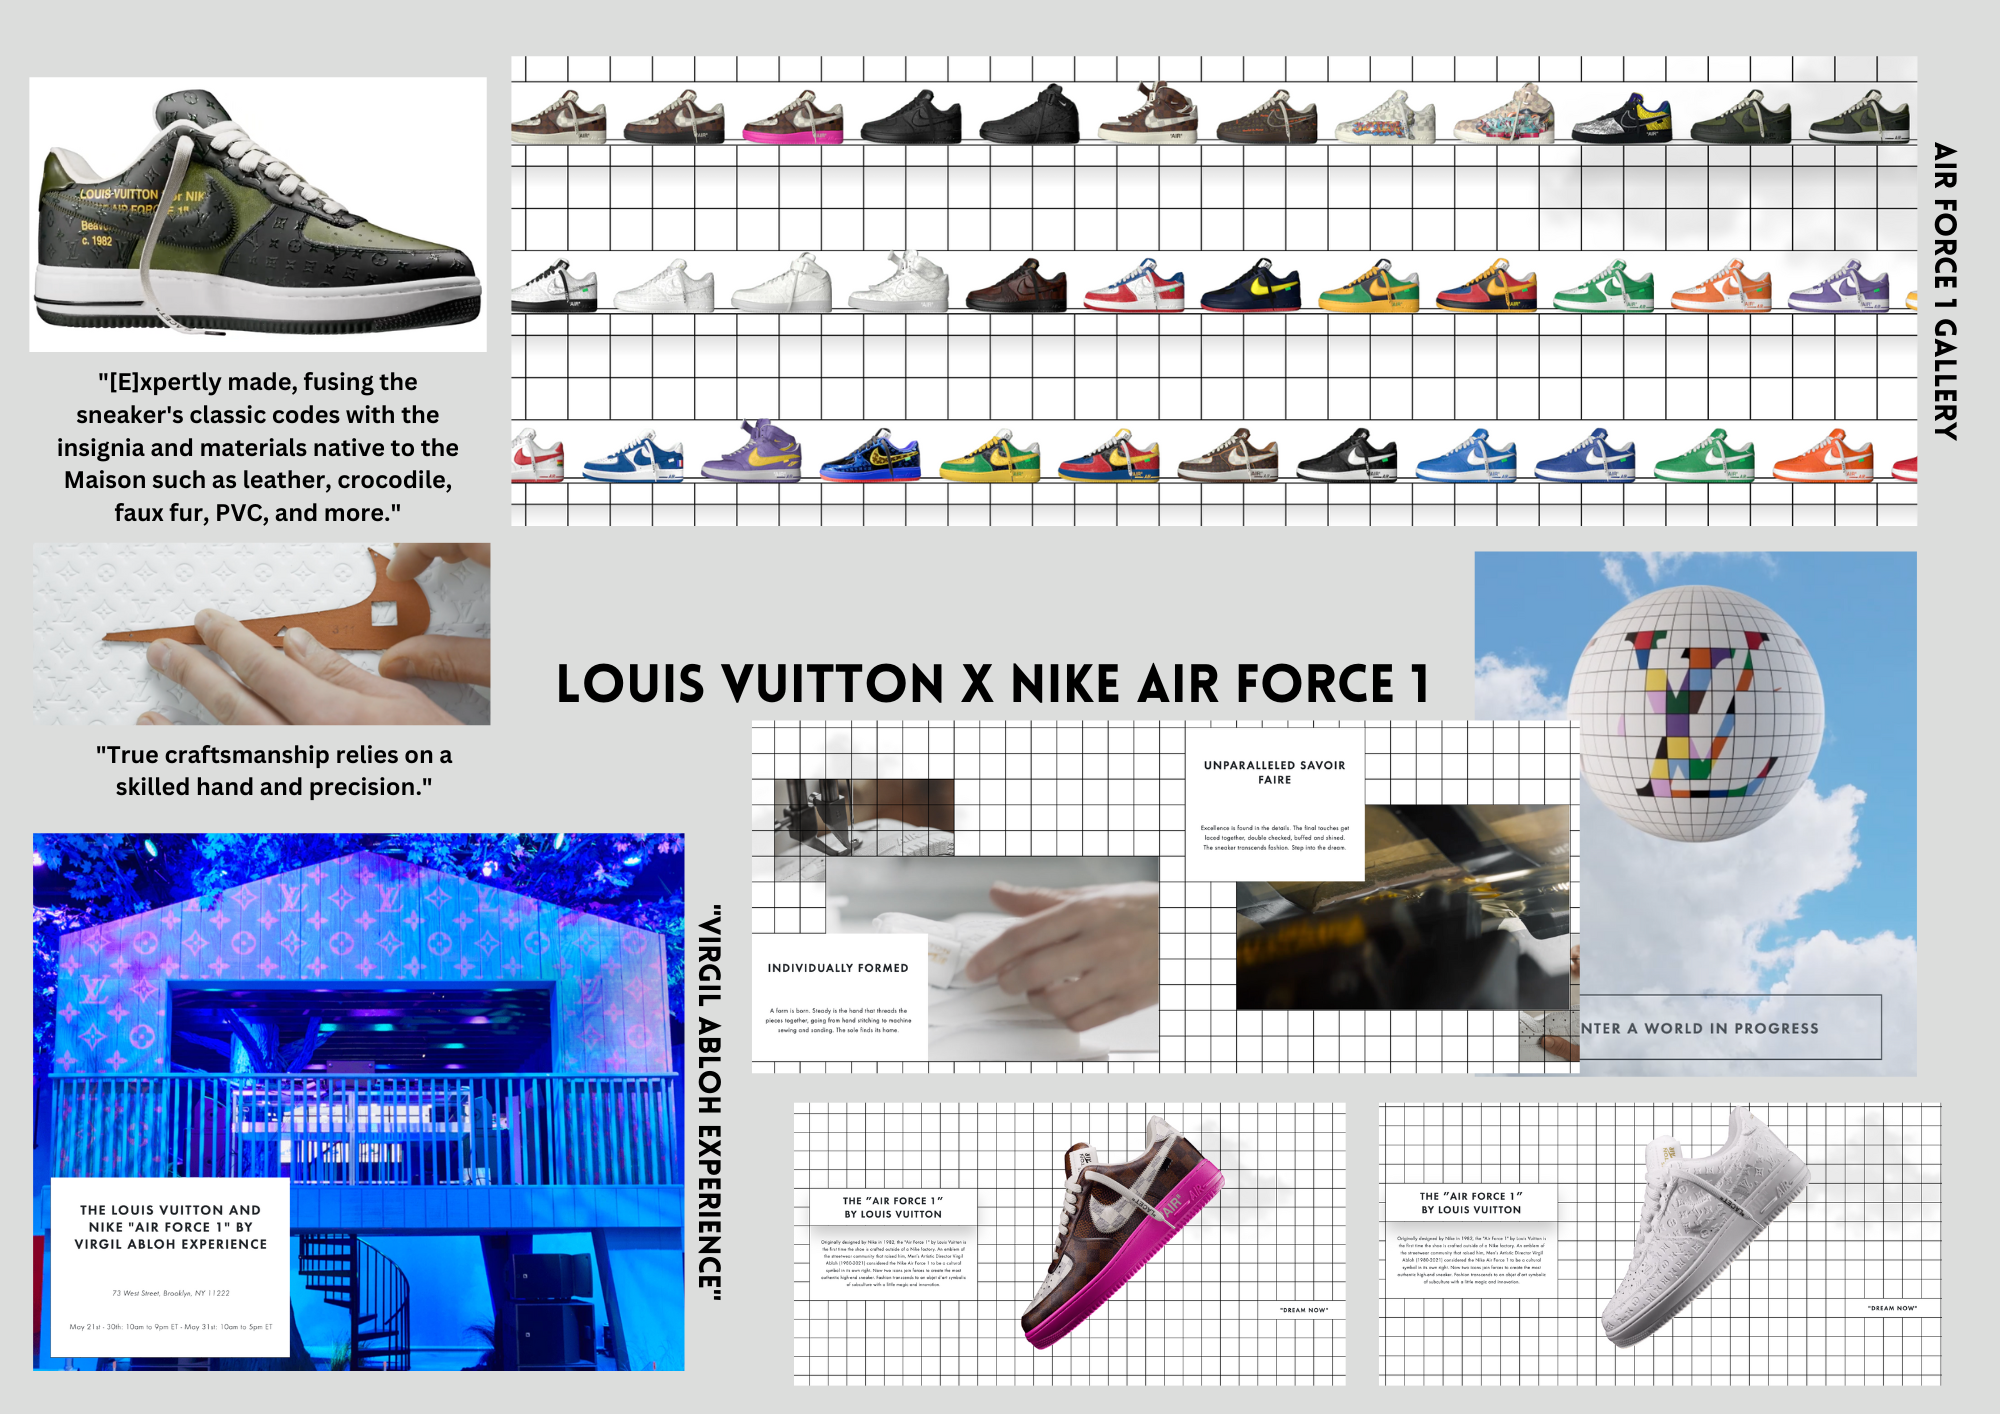 There's A Virgil Abloh's Louis Vuitton x Nike Air Force 1